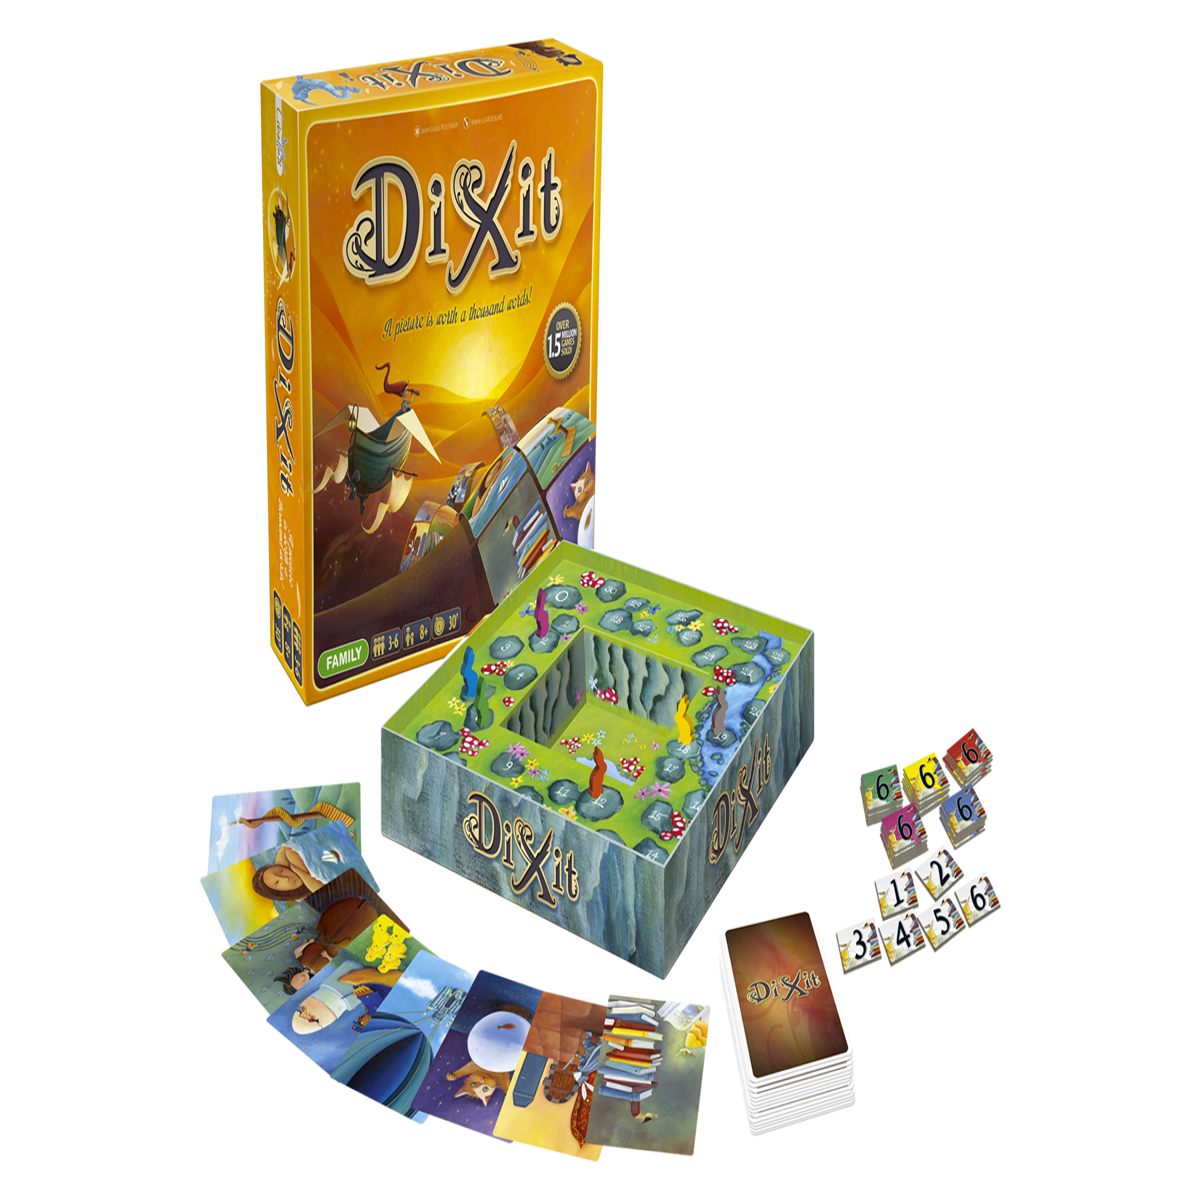 Dixit Daydreams expansion Board Game